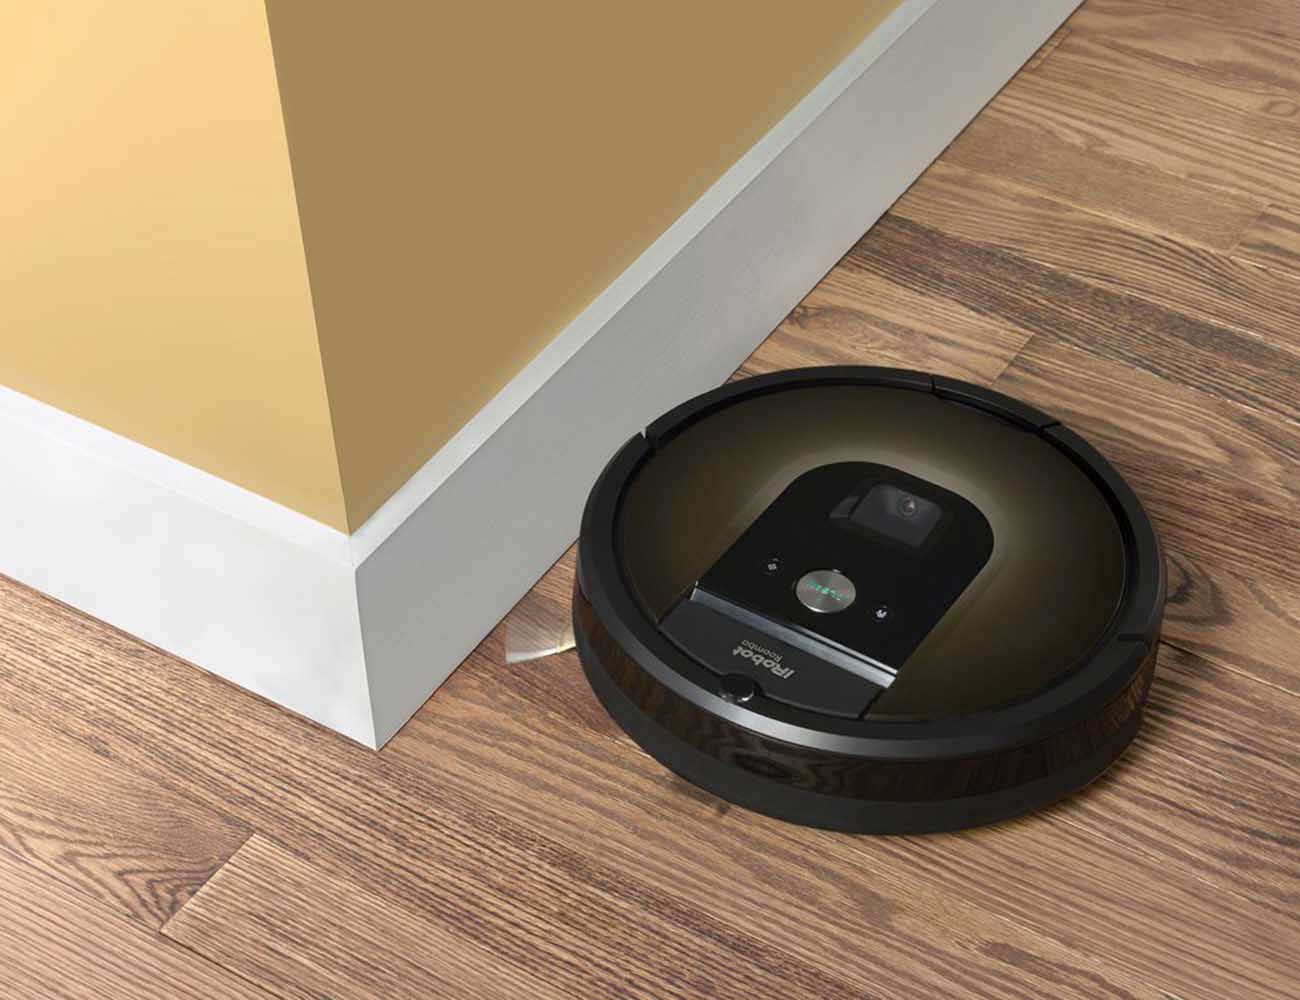 iRobot Roomba 980 vacuum cleaning robot can navigate through your home